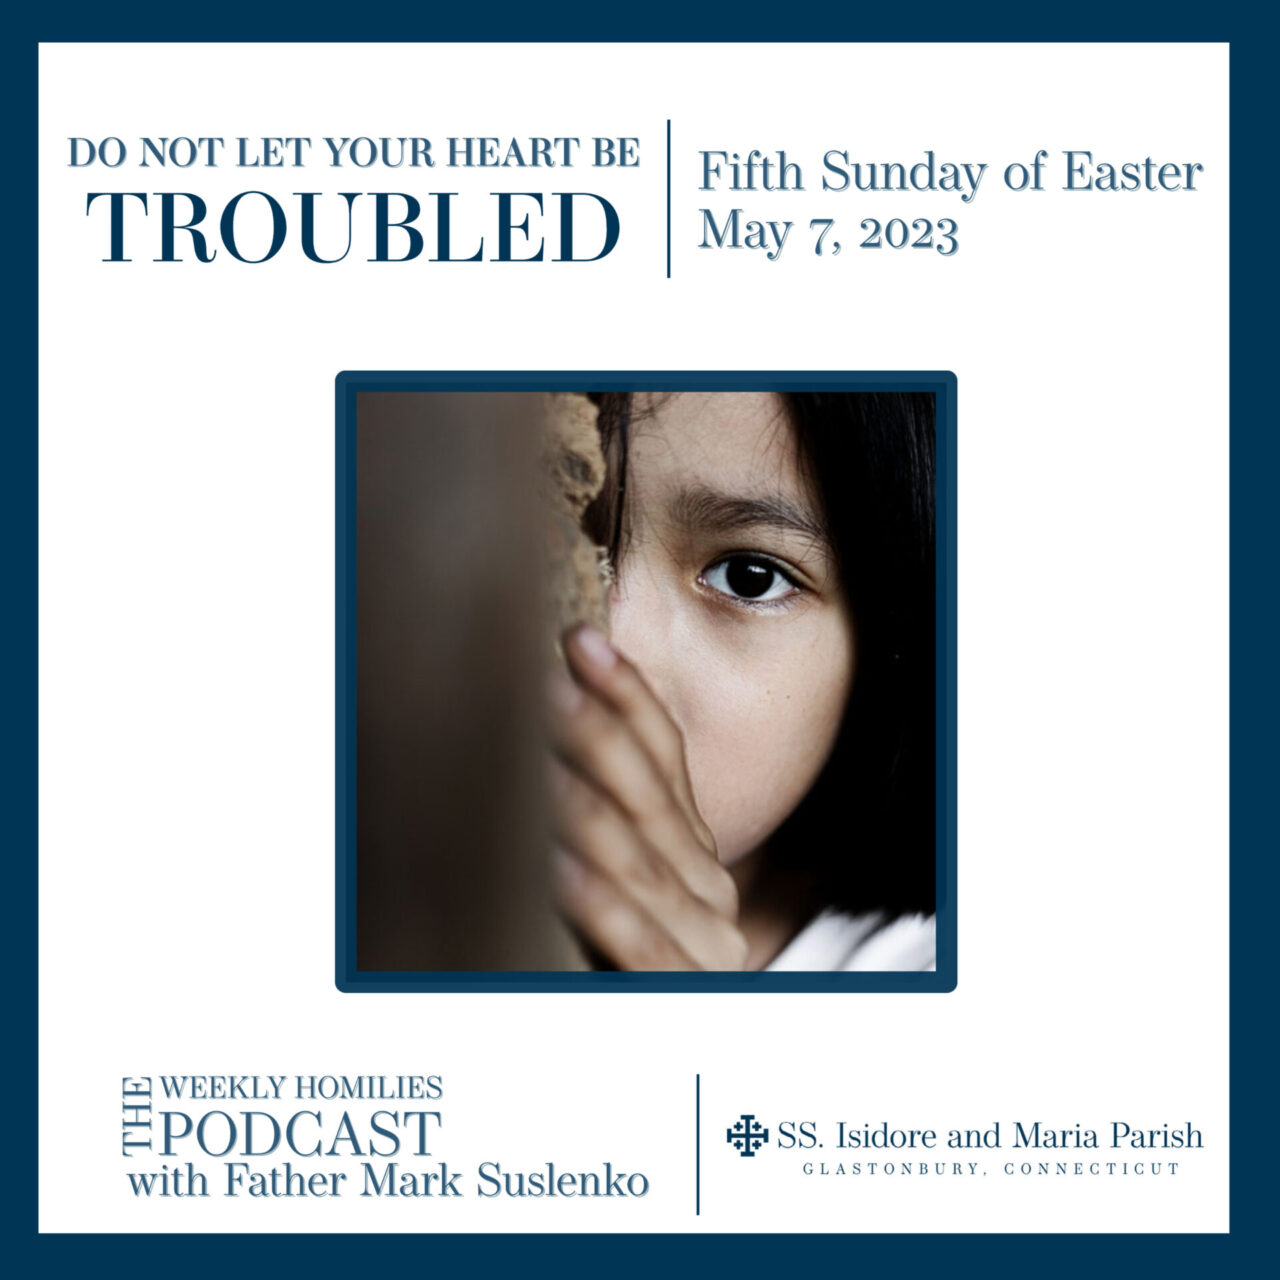 PODCAST: Do Not Let Your Heart Be Troubled